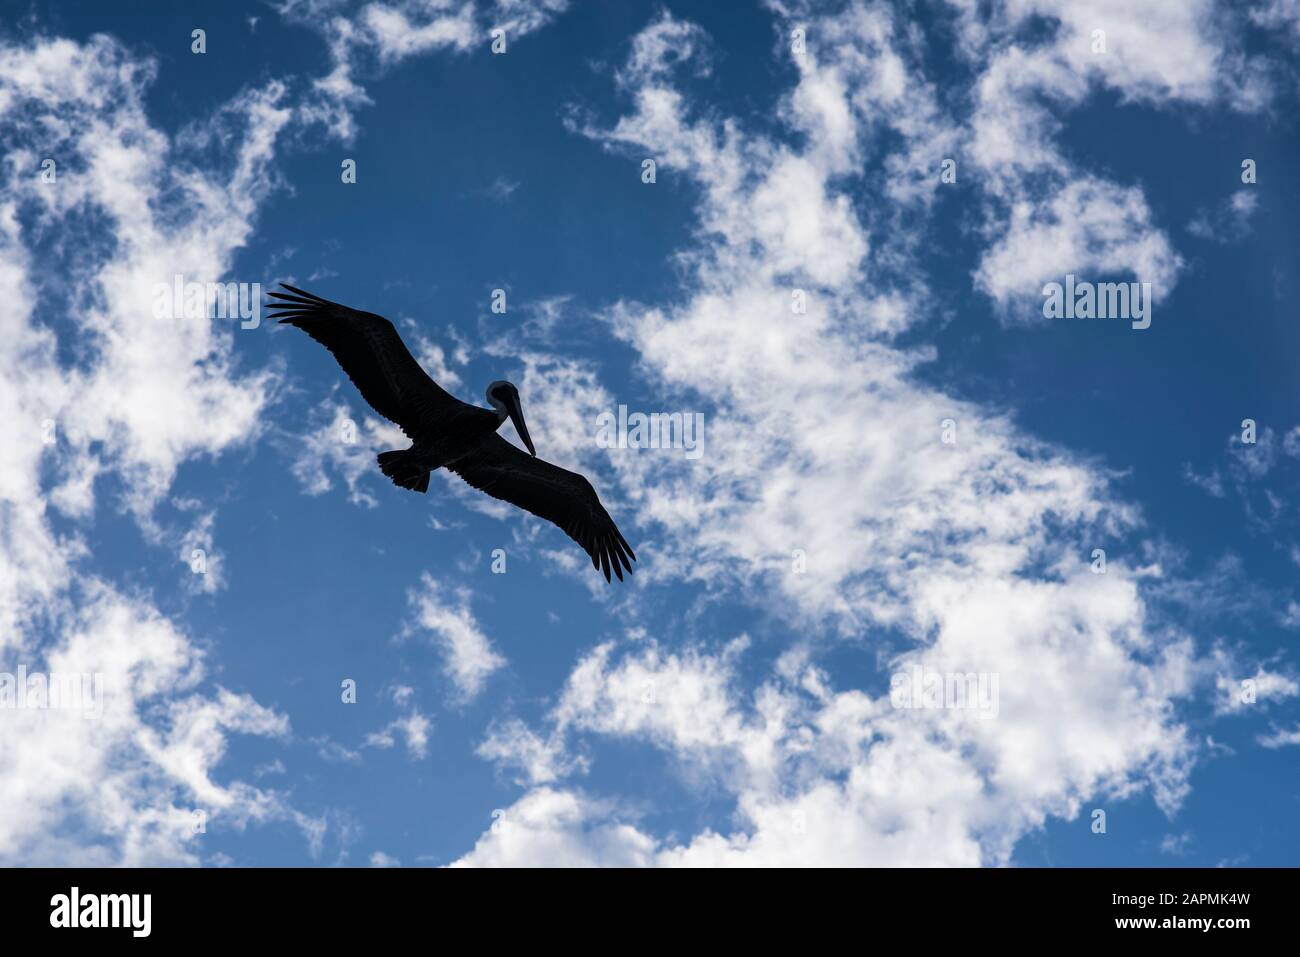 Silhouette of a pelican flying Stock Photo - Alamy